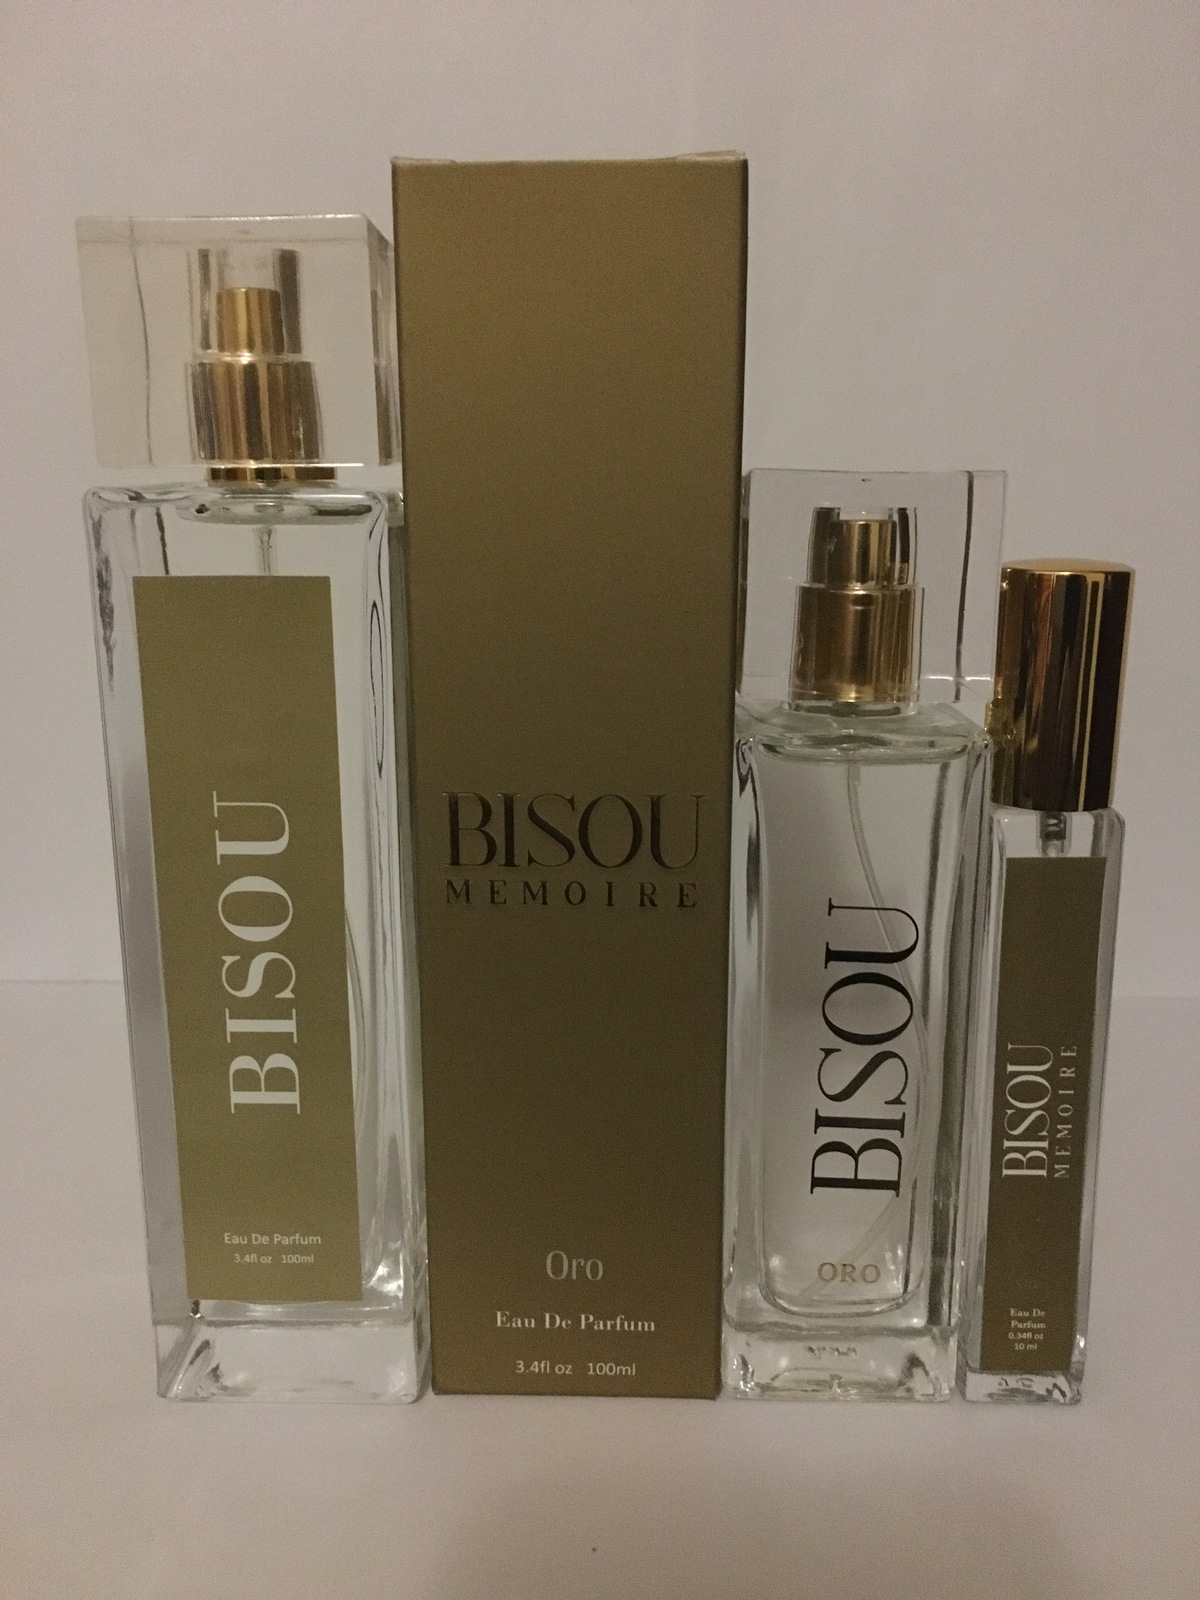 A group of three bottles of perfume on top of each other.